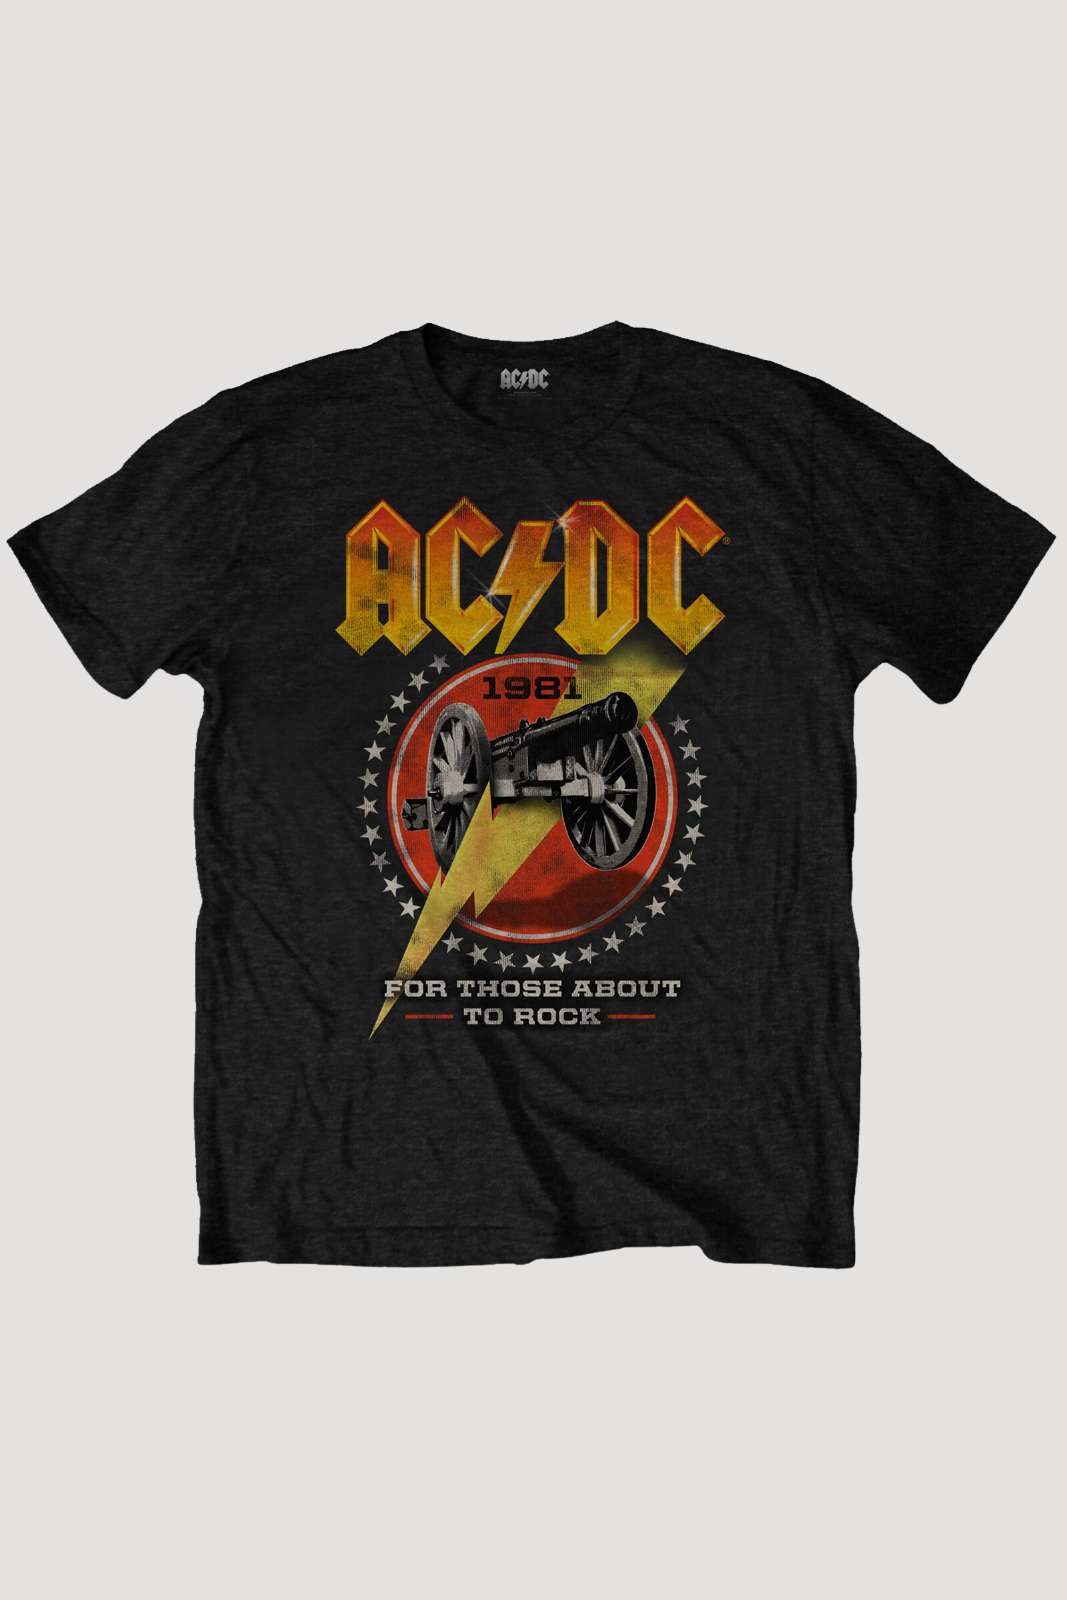 AC/DC For Those About To Rock '81 Shirt